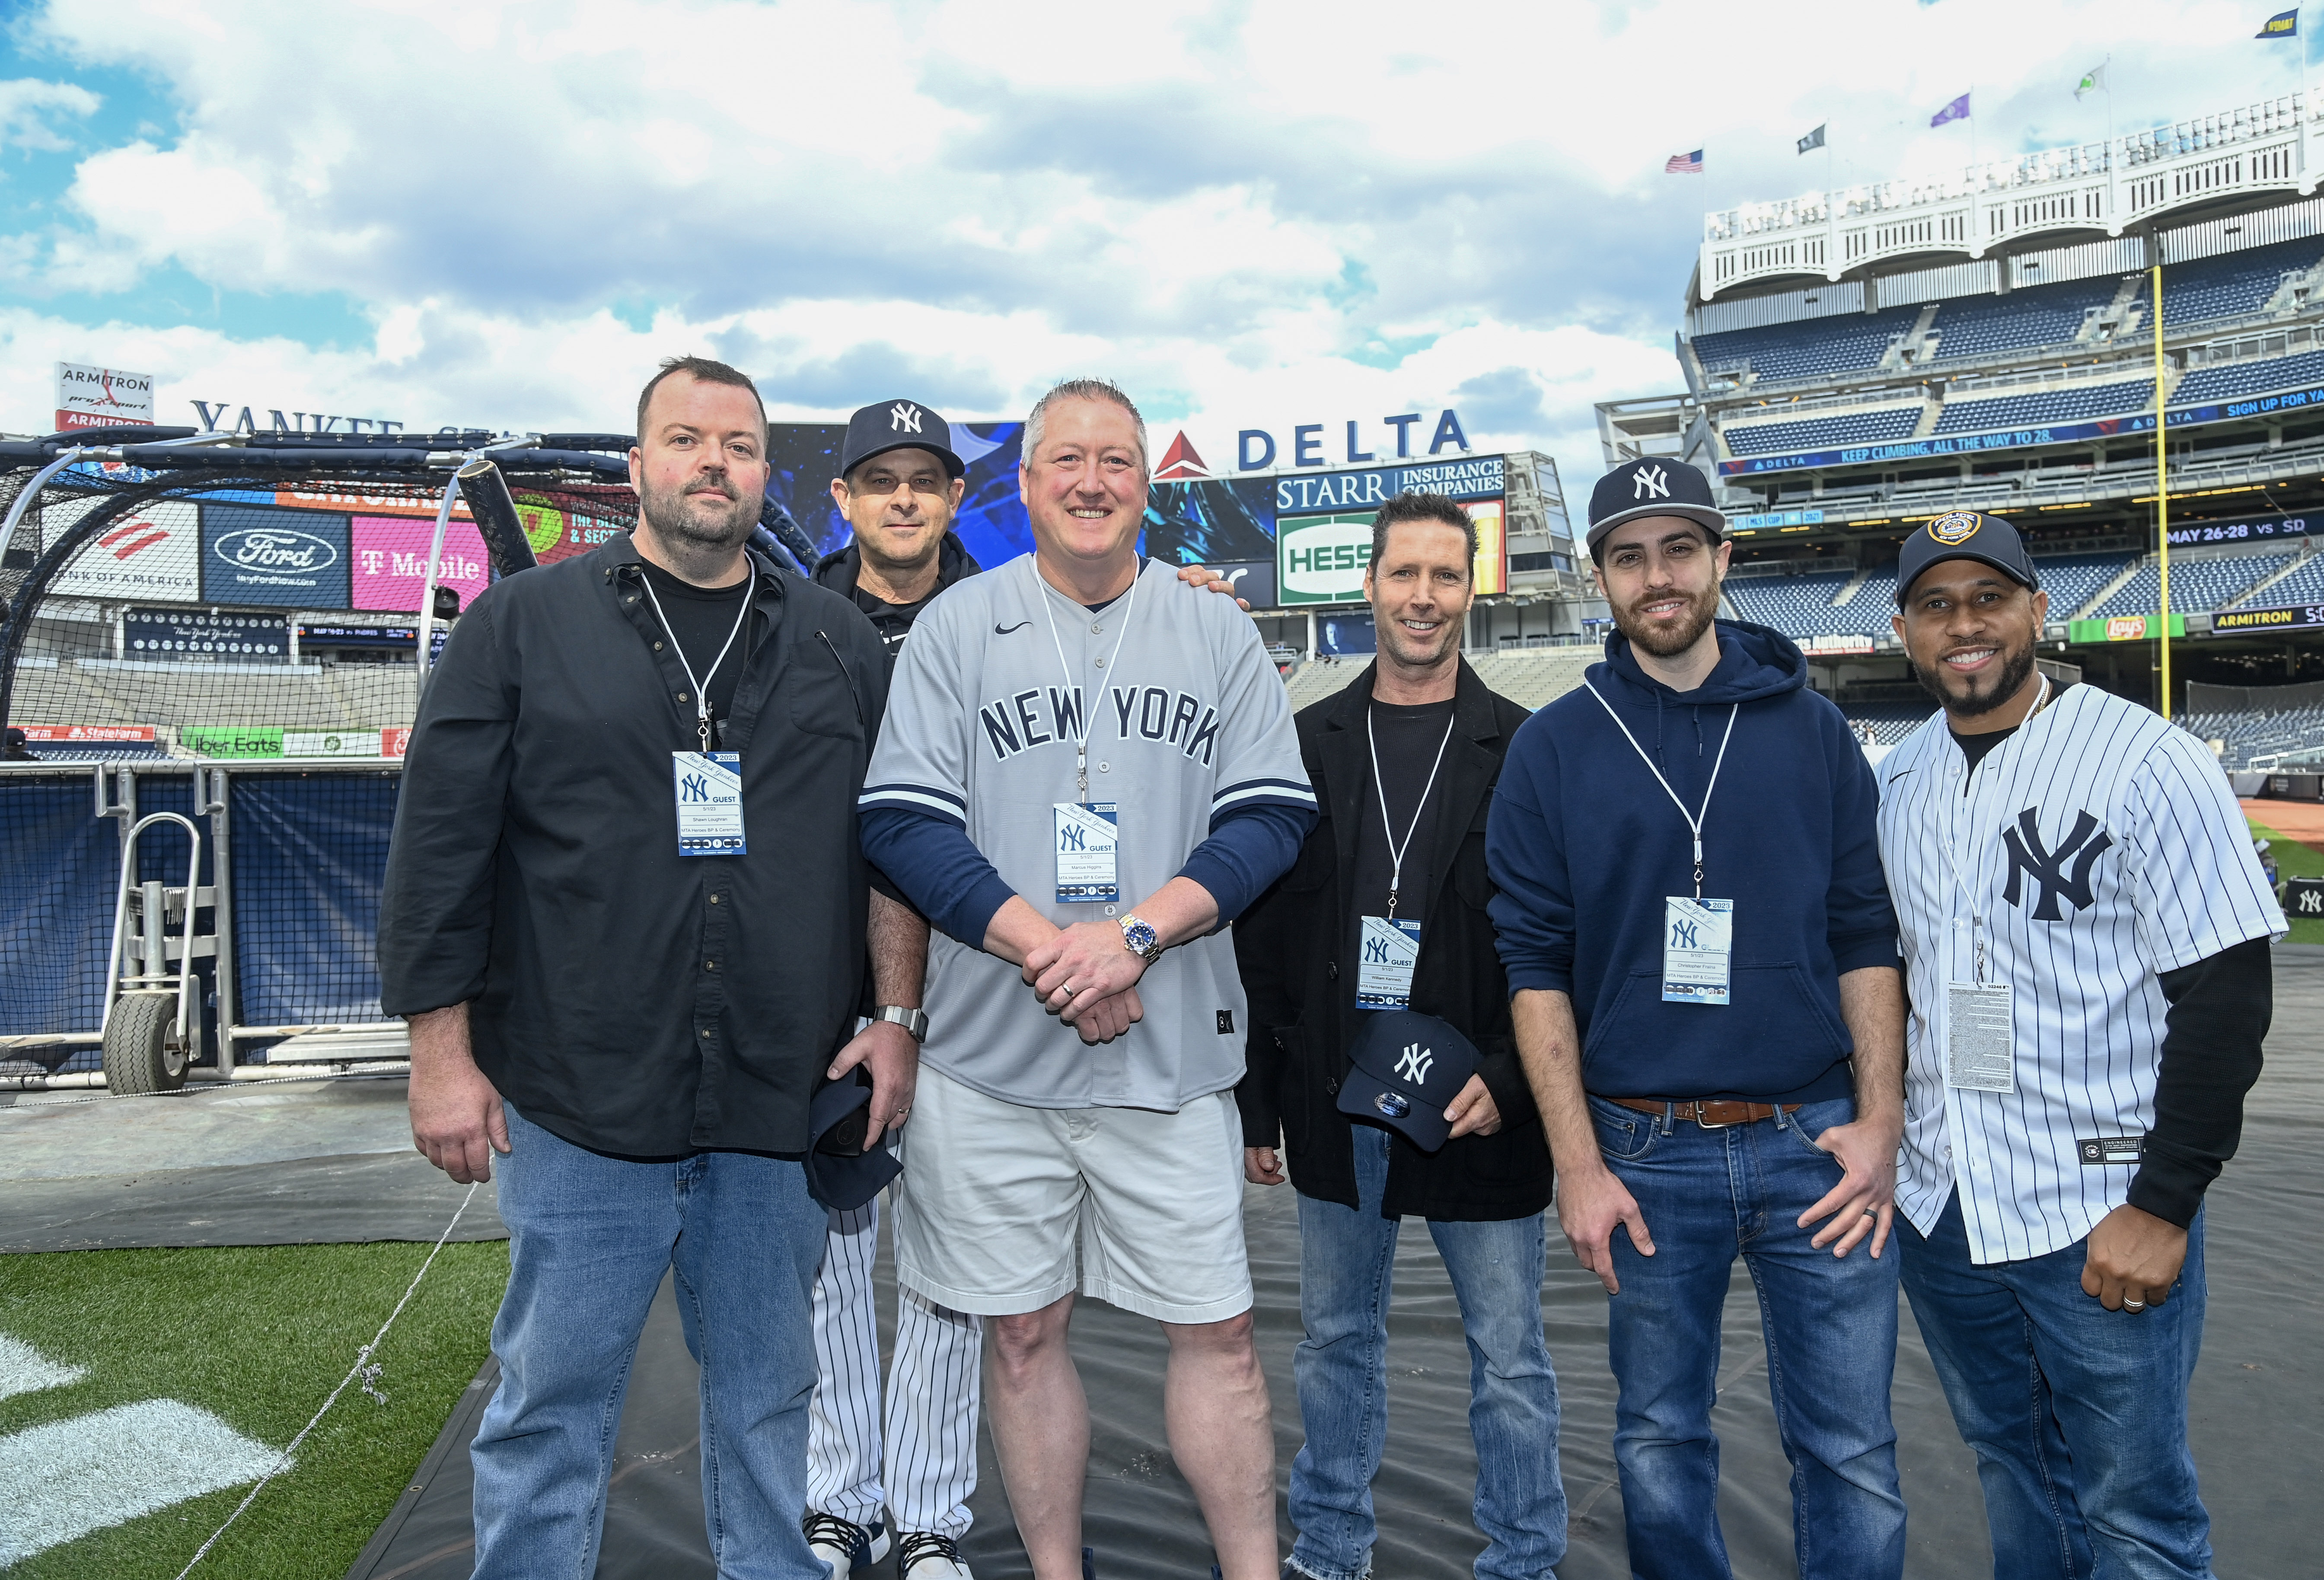 PHOTOS: New York Yankees Honor Metro-North Employees Who Rescued Child Who Fell on Train Tracks 